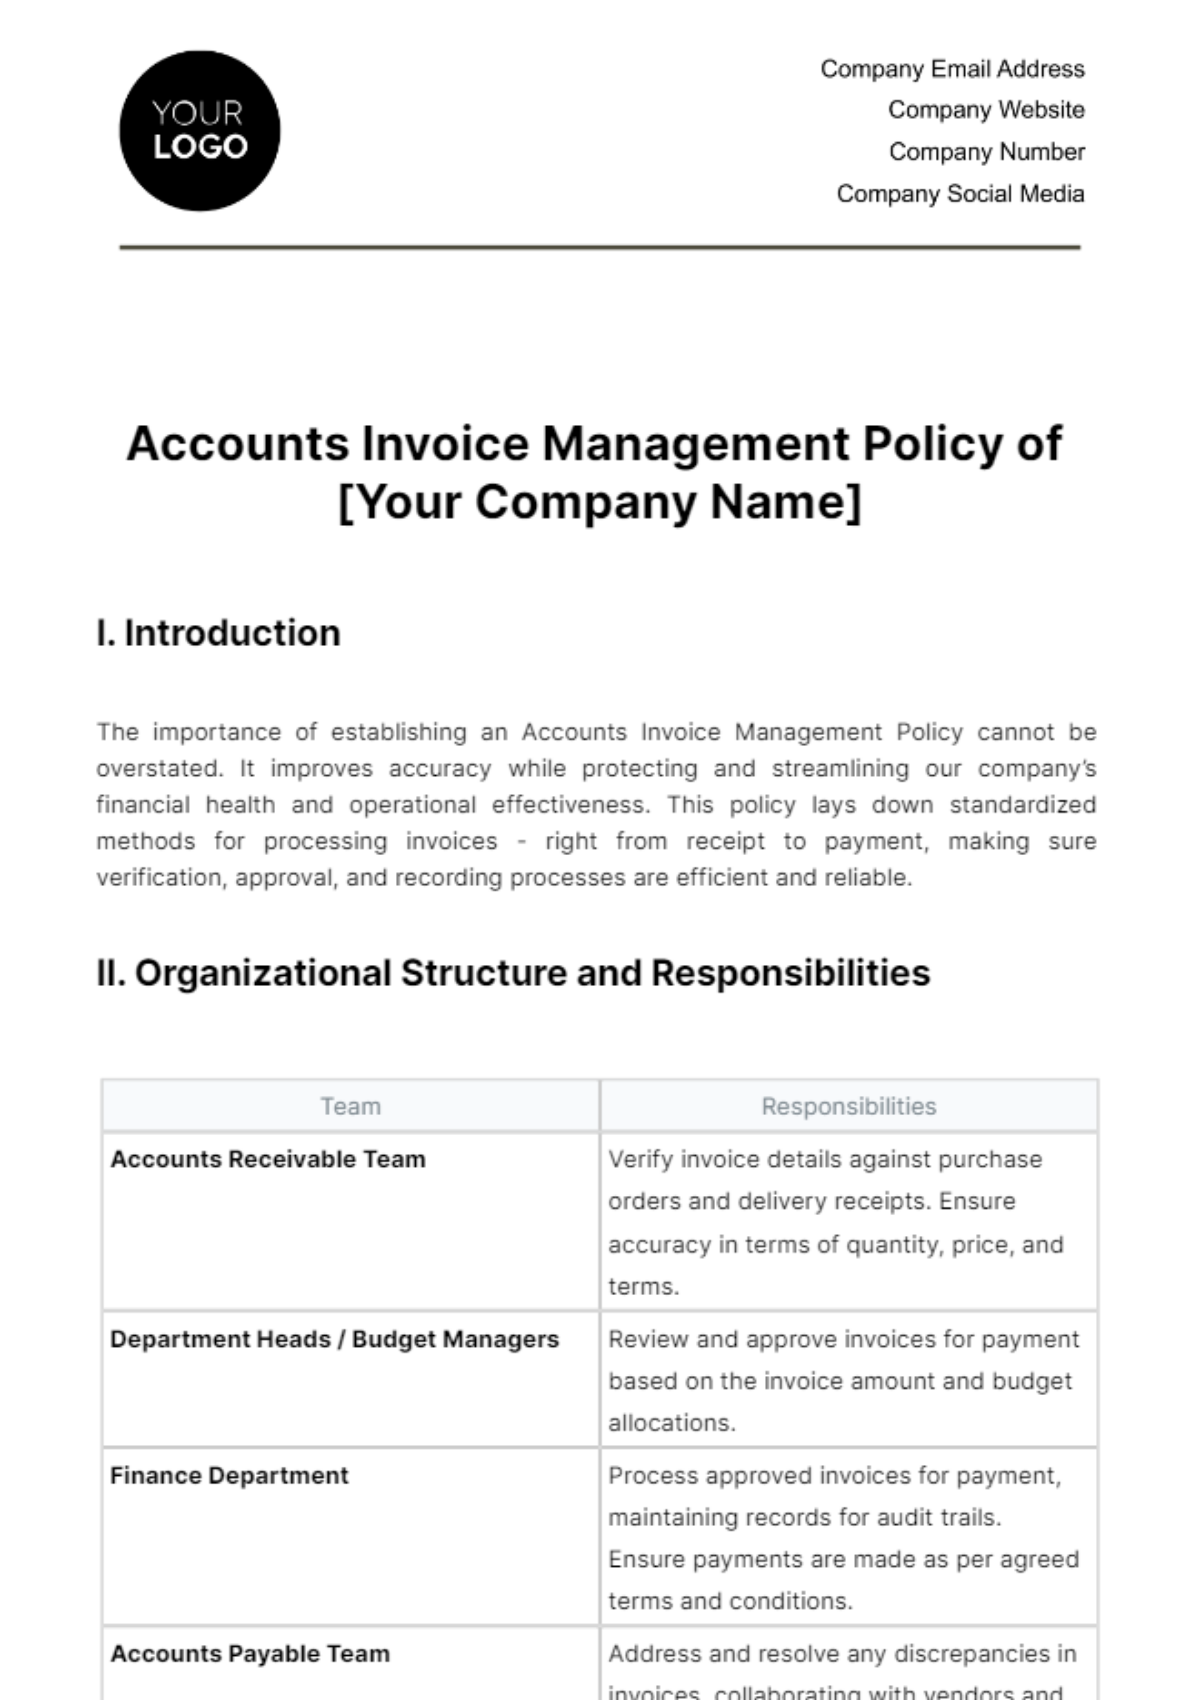 Accounts Invoice Management Policy Template